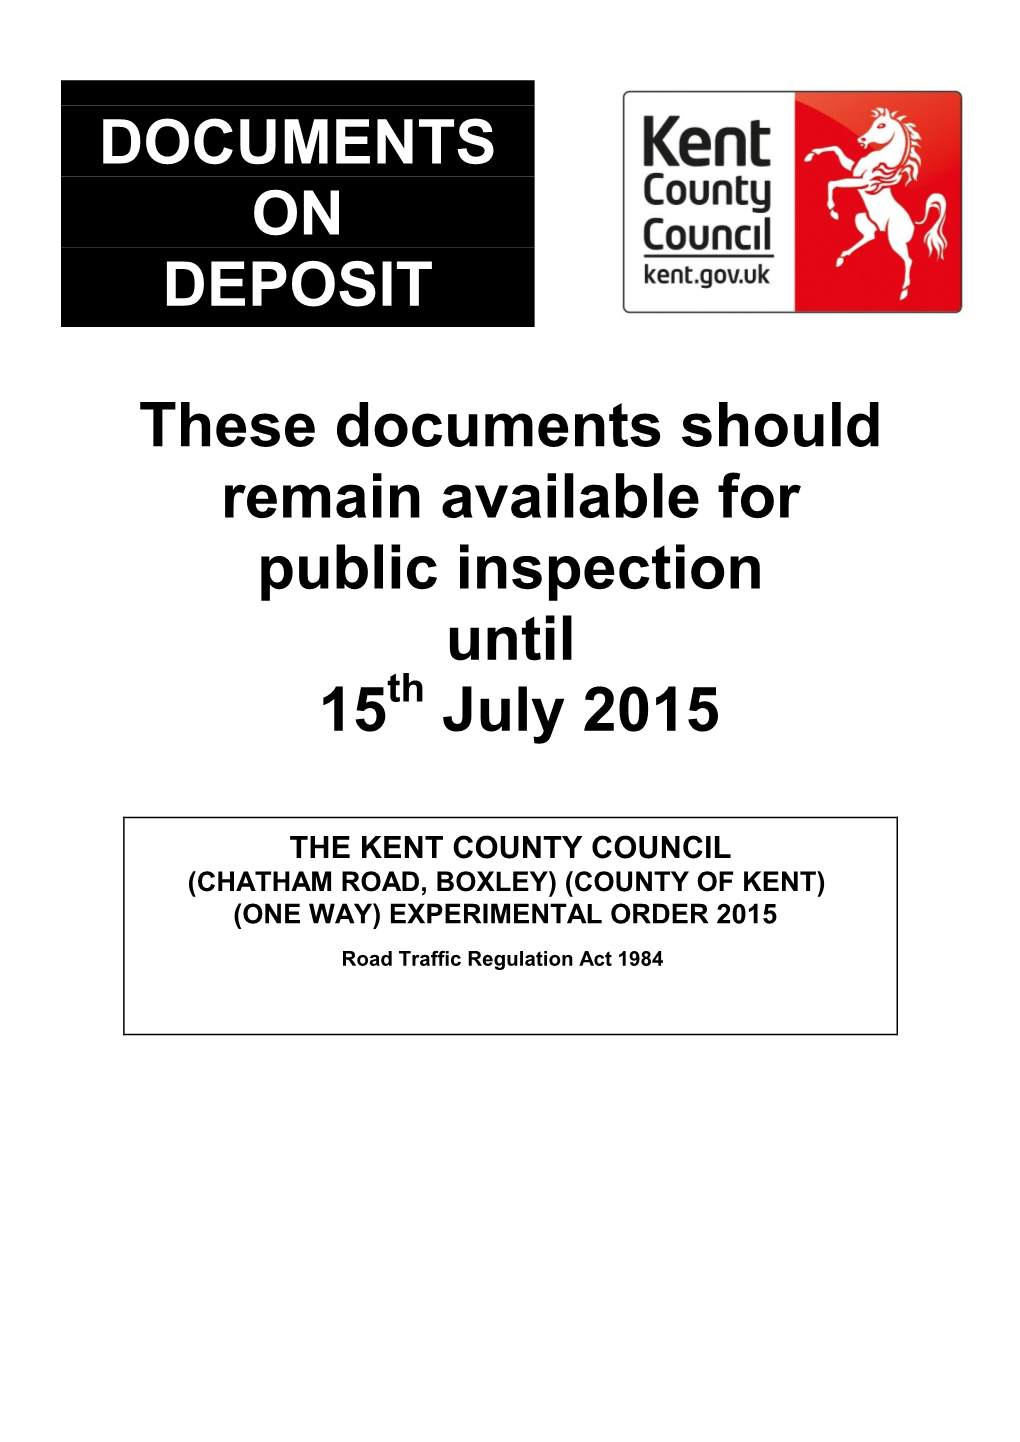 The Kent County Council (Chatham Road, Boxley) (County of Kent) (One Way) Experimental Order 2015